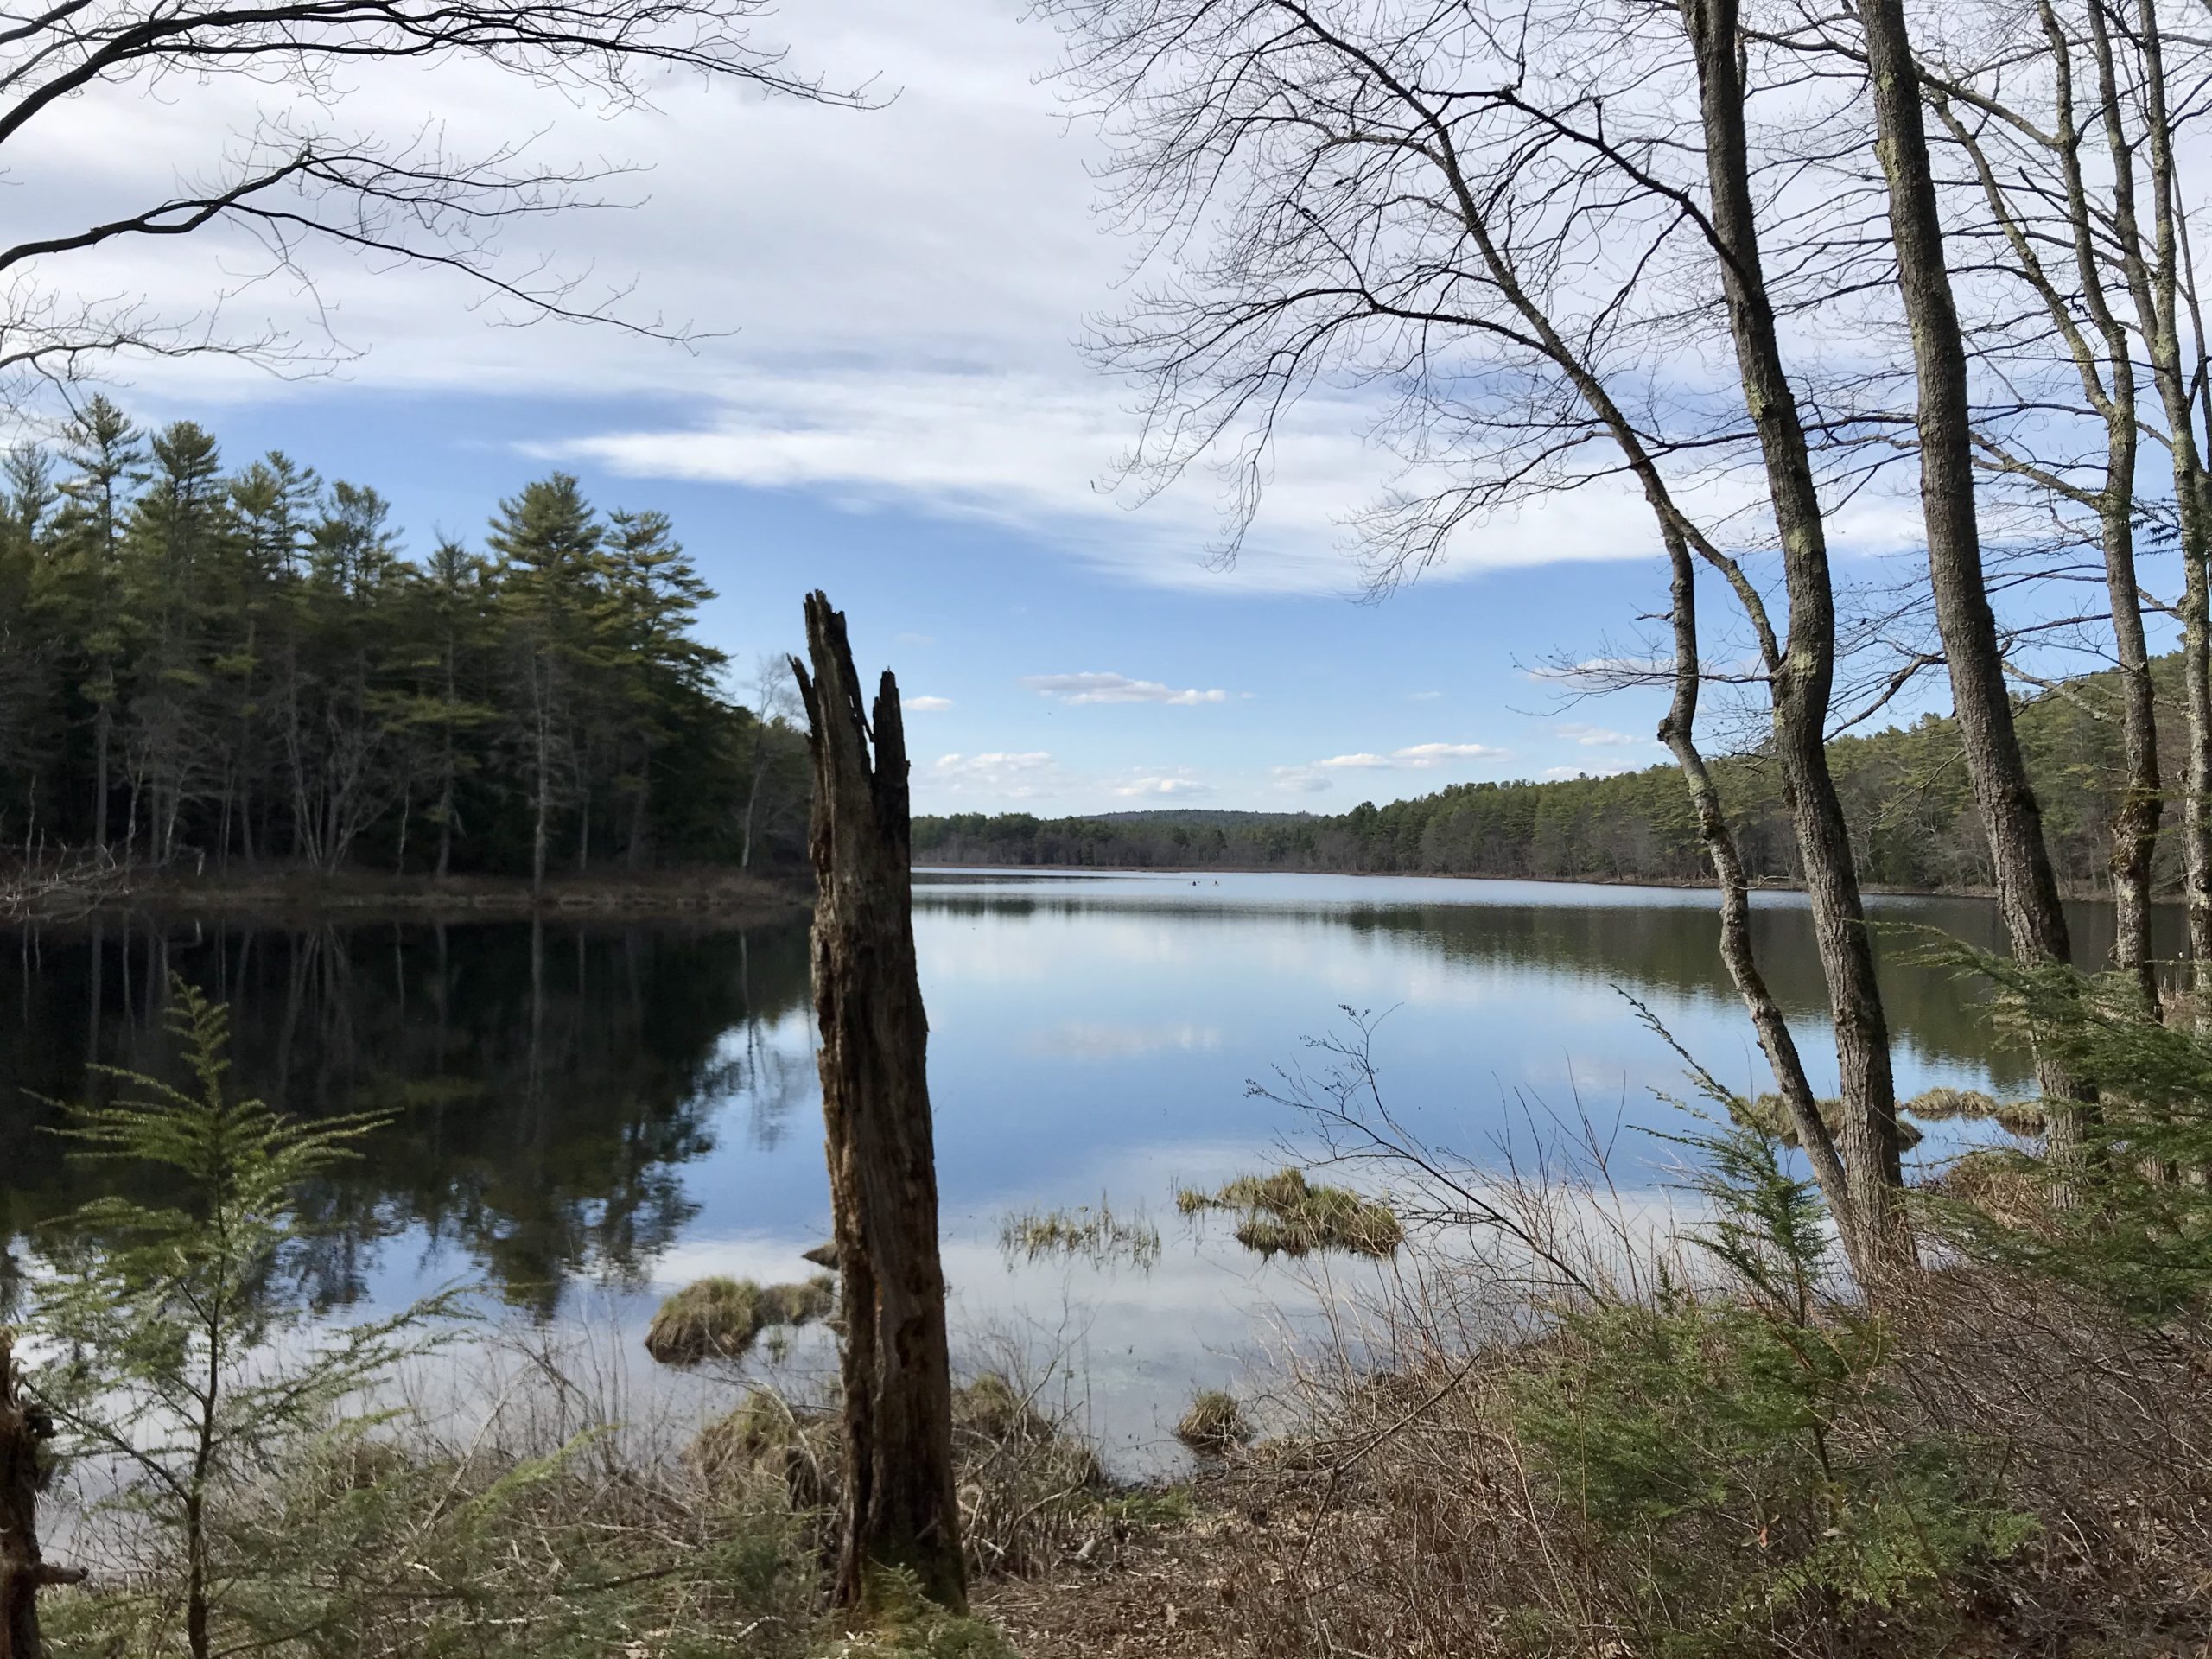 Looking for Massachusetts hiking trails? Tully Lake trail is a winding trail for hiking, walking and biking. Lake Tully is in Royalston, MA and is a great local travel spot.